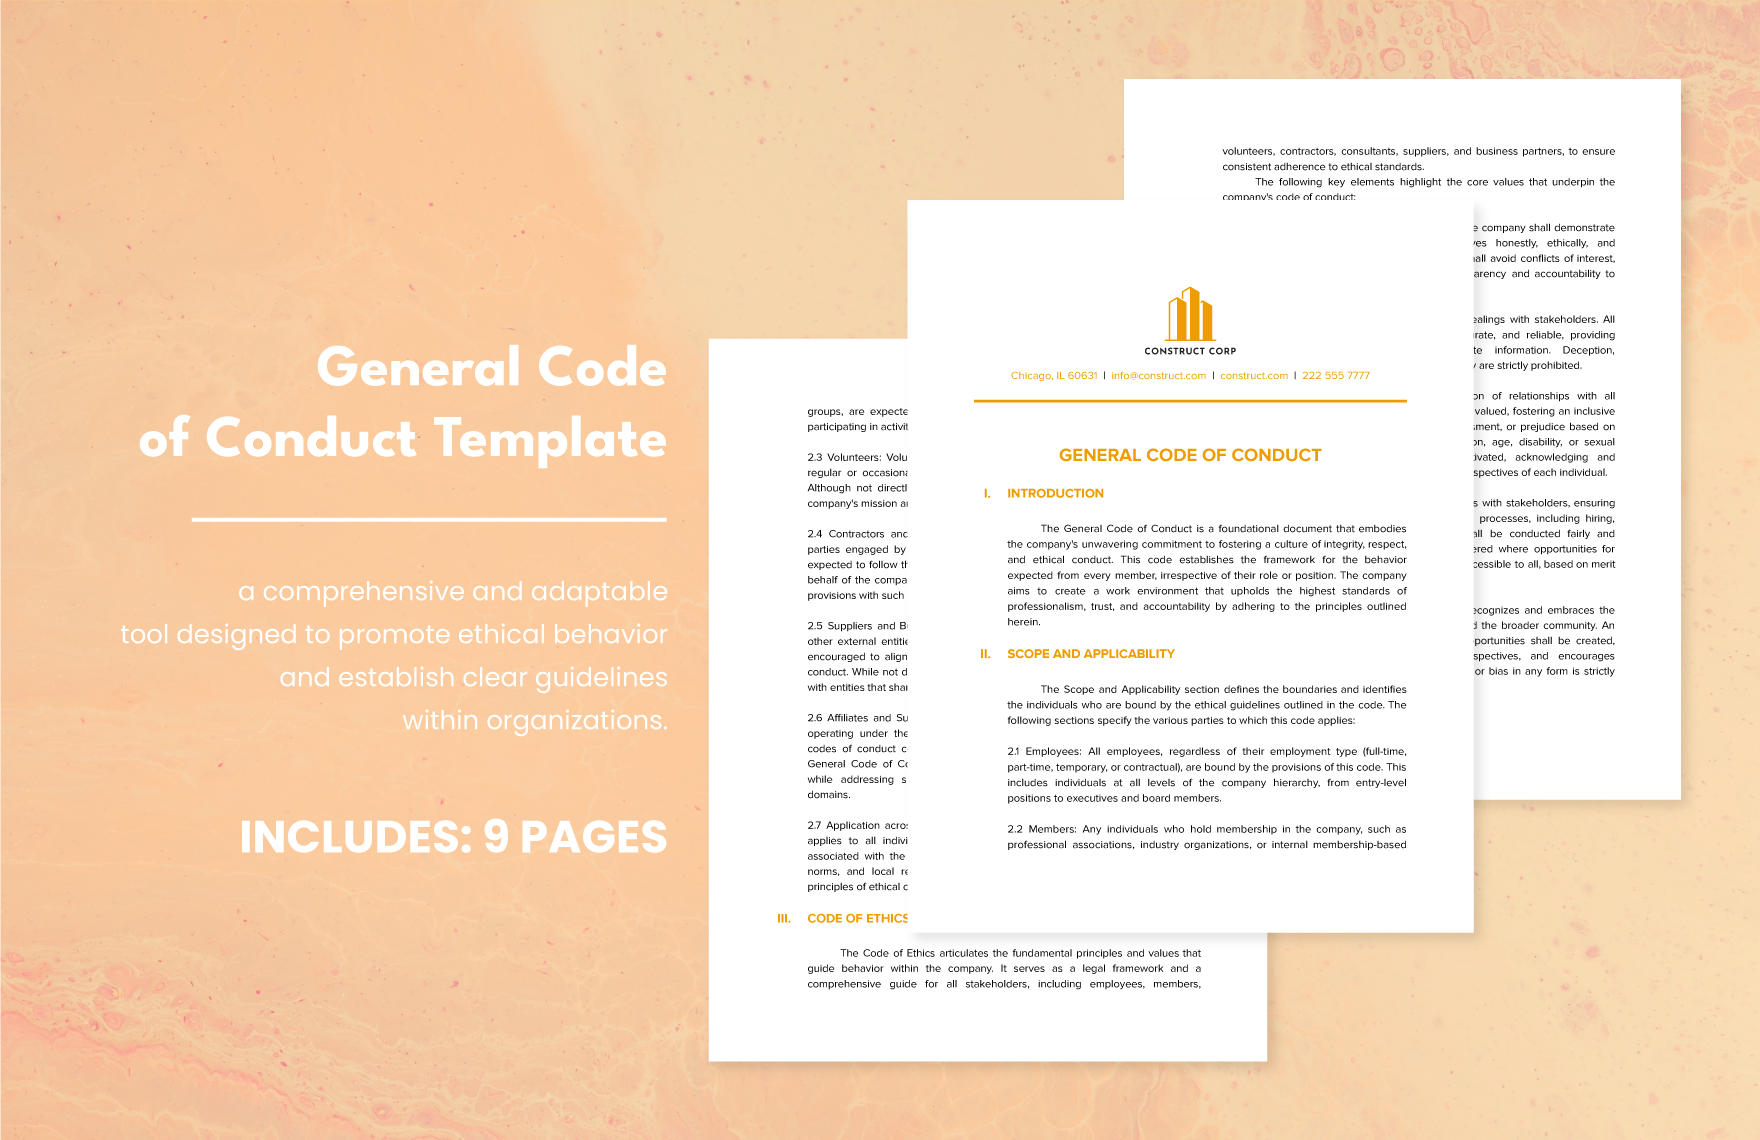 General Code of Conduct Template